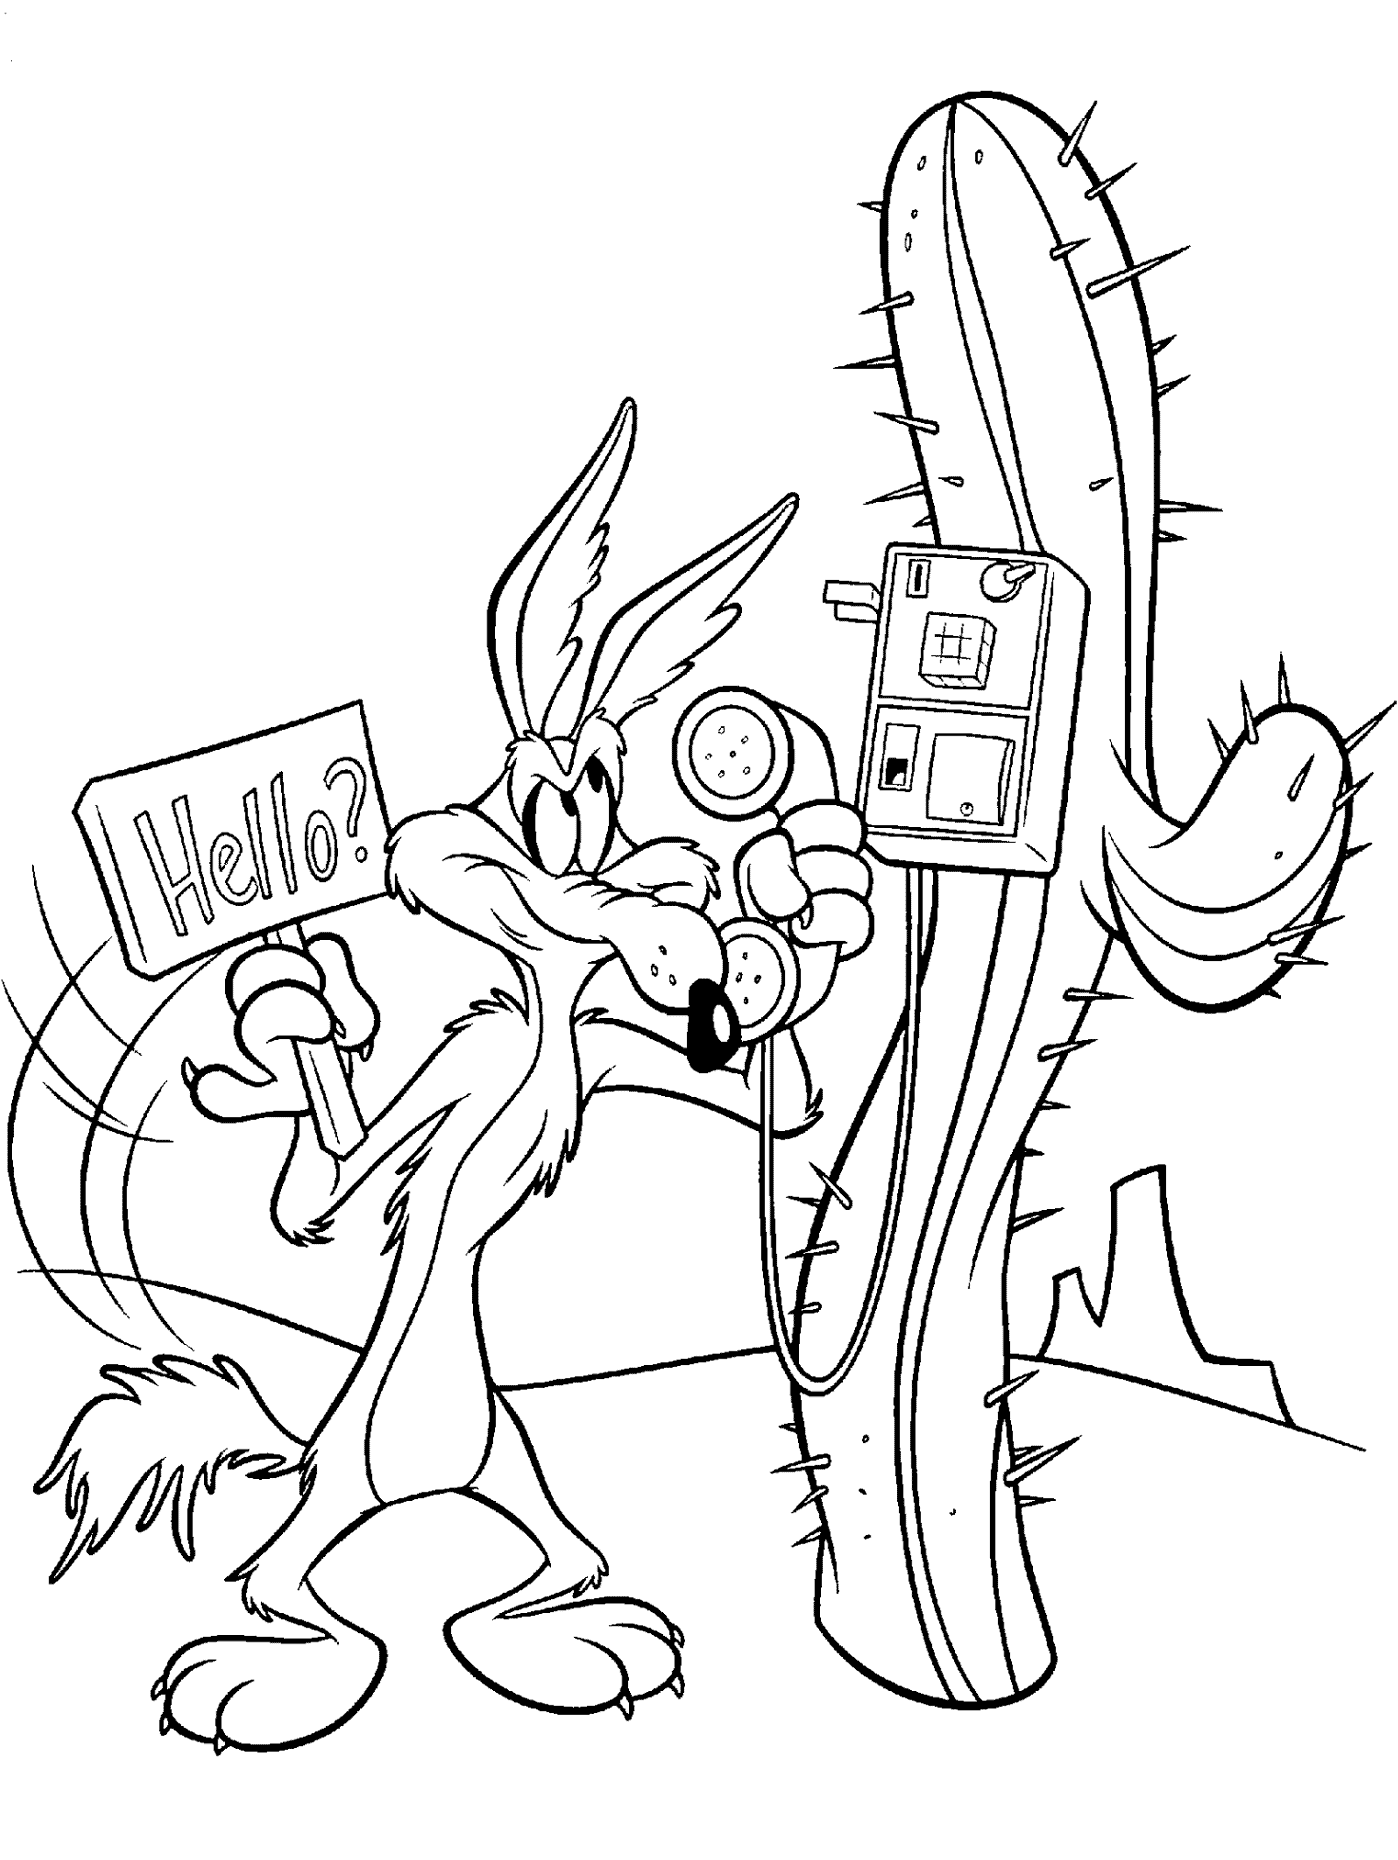 Wile E. Coyote Coloring page : LOONEY TUNES SPOT COLORING PAGES